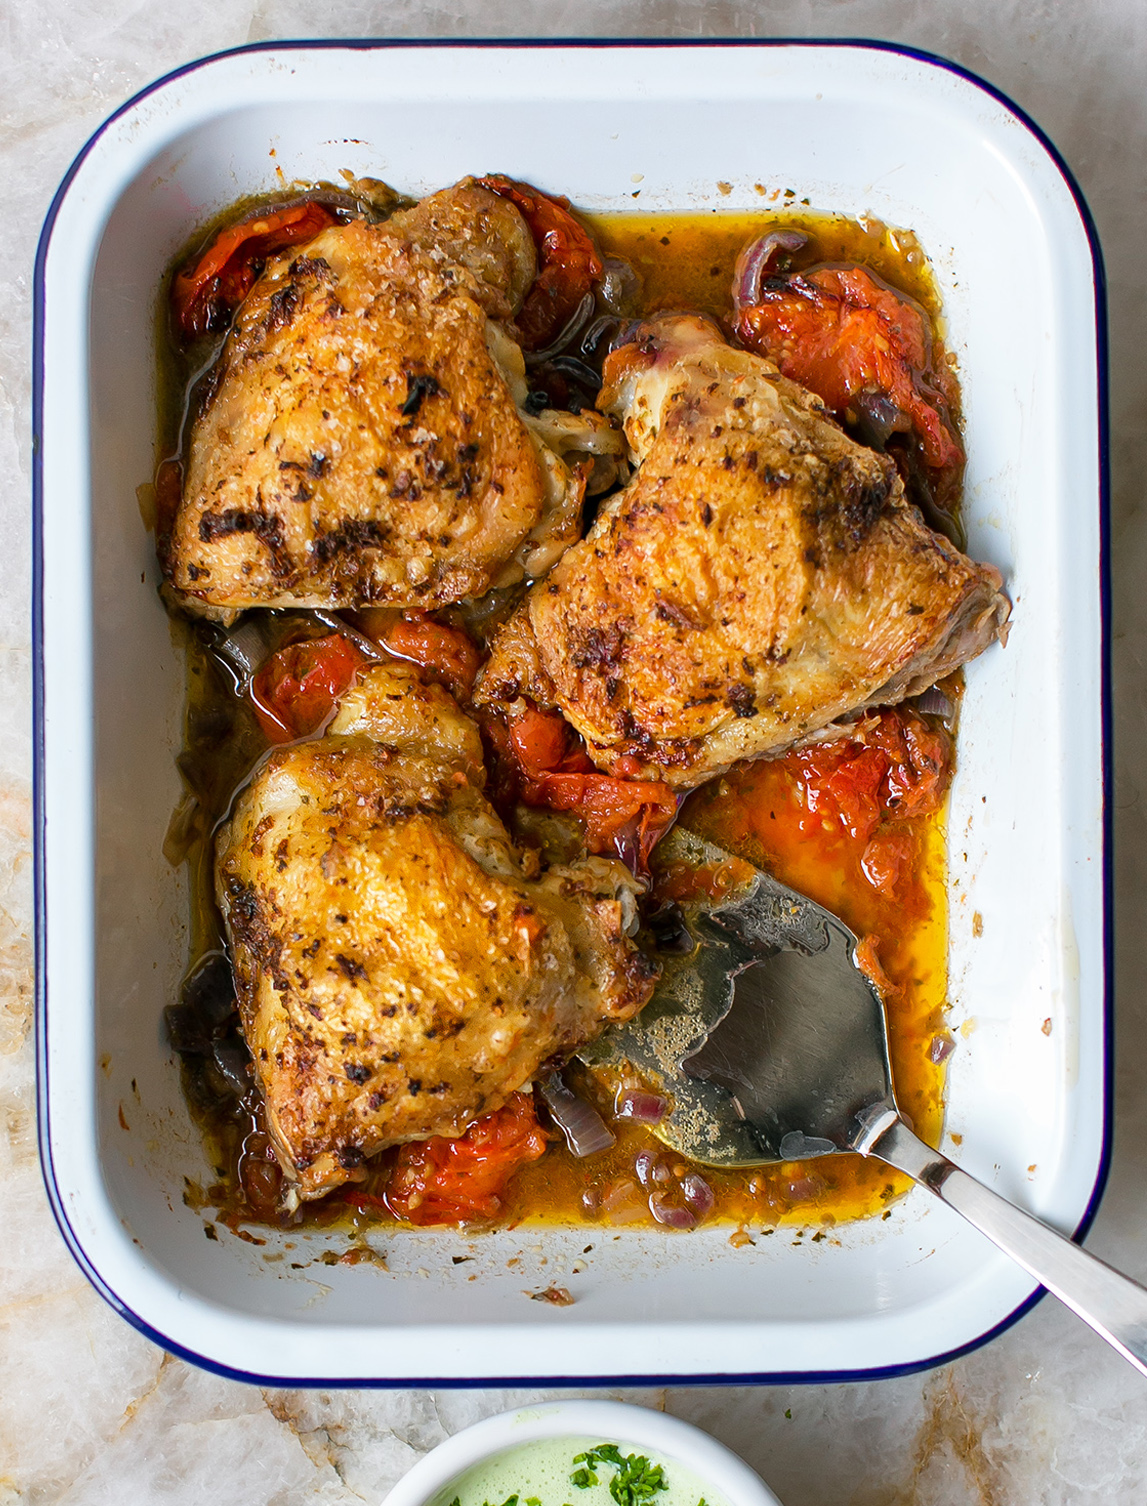 Oven tray with Garam Masala Roasted Chicken Recipe inside and spoon for scooping up spiced oil